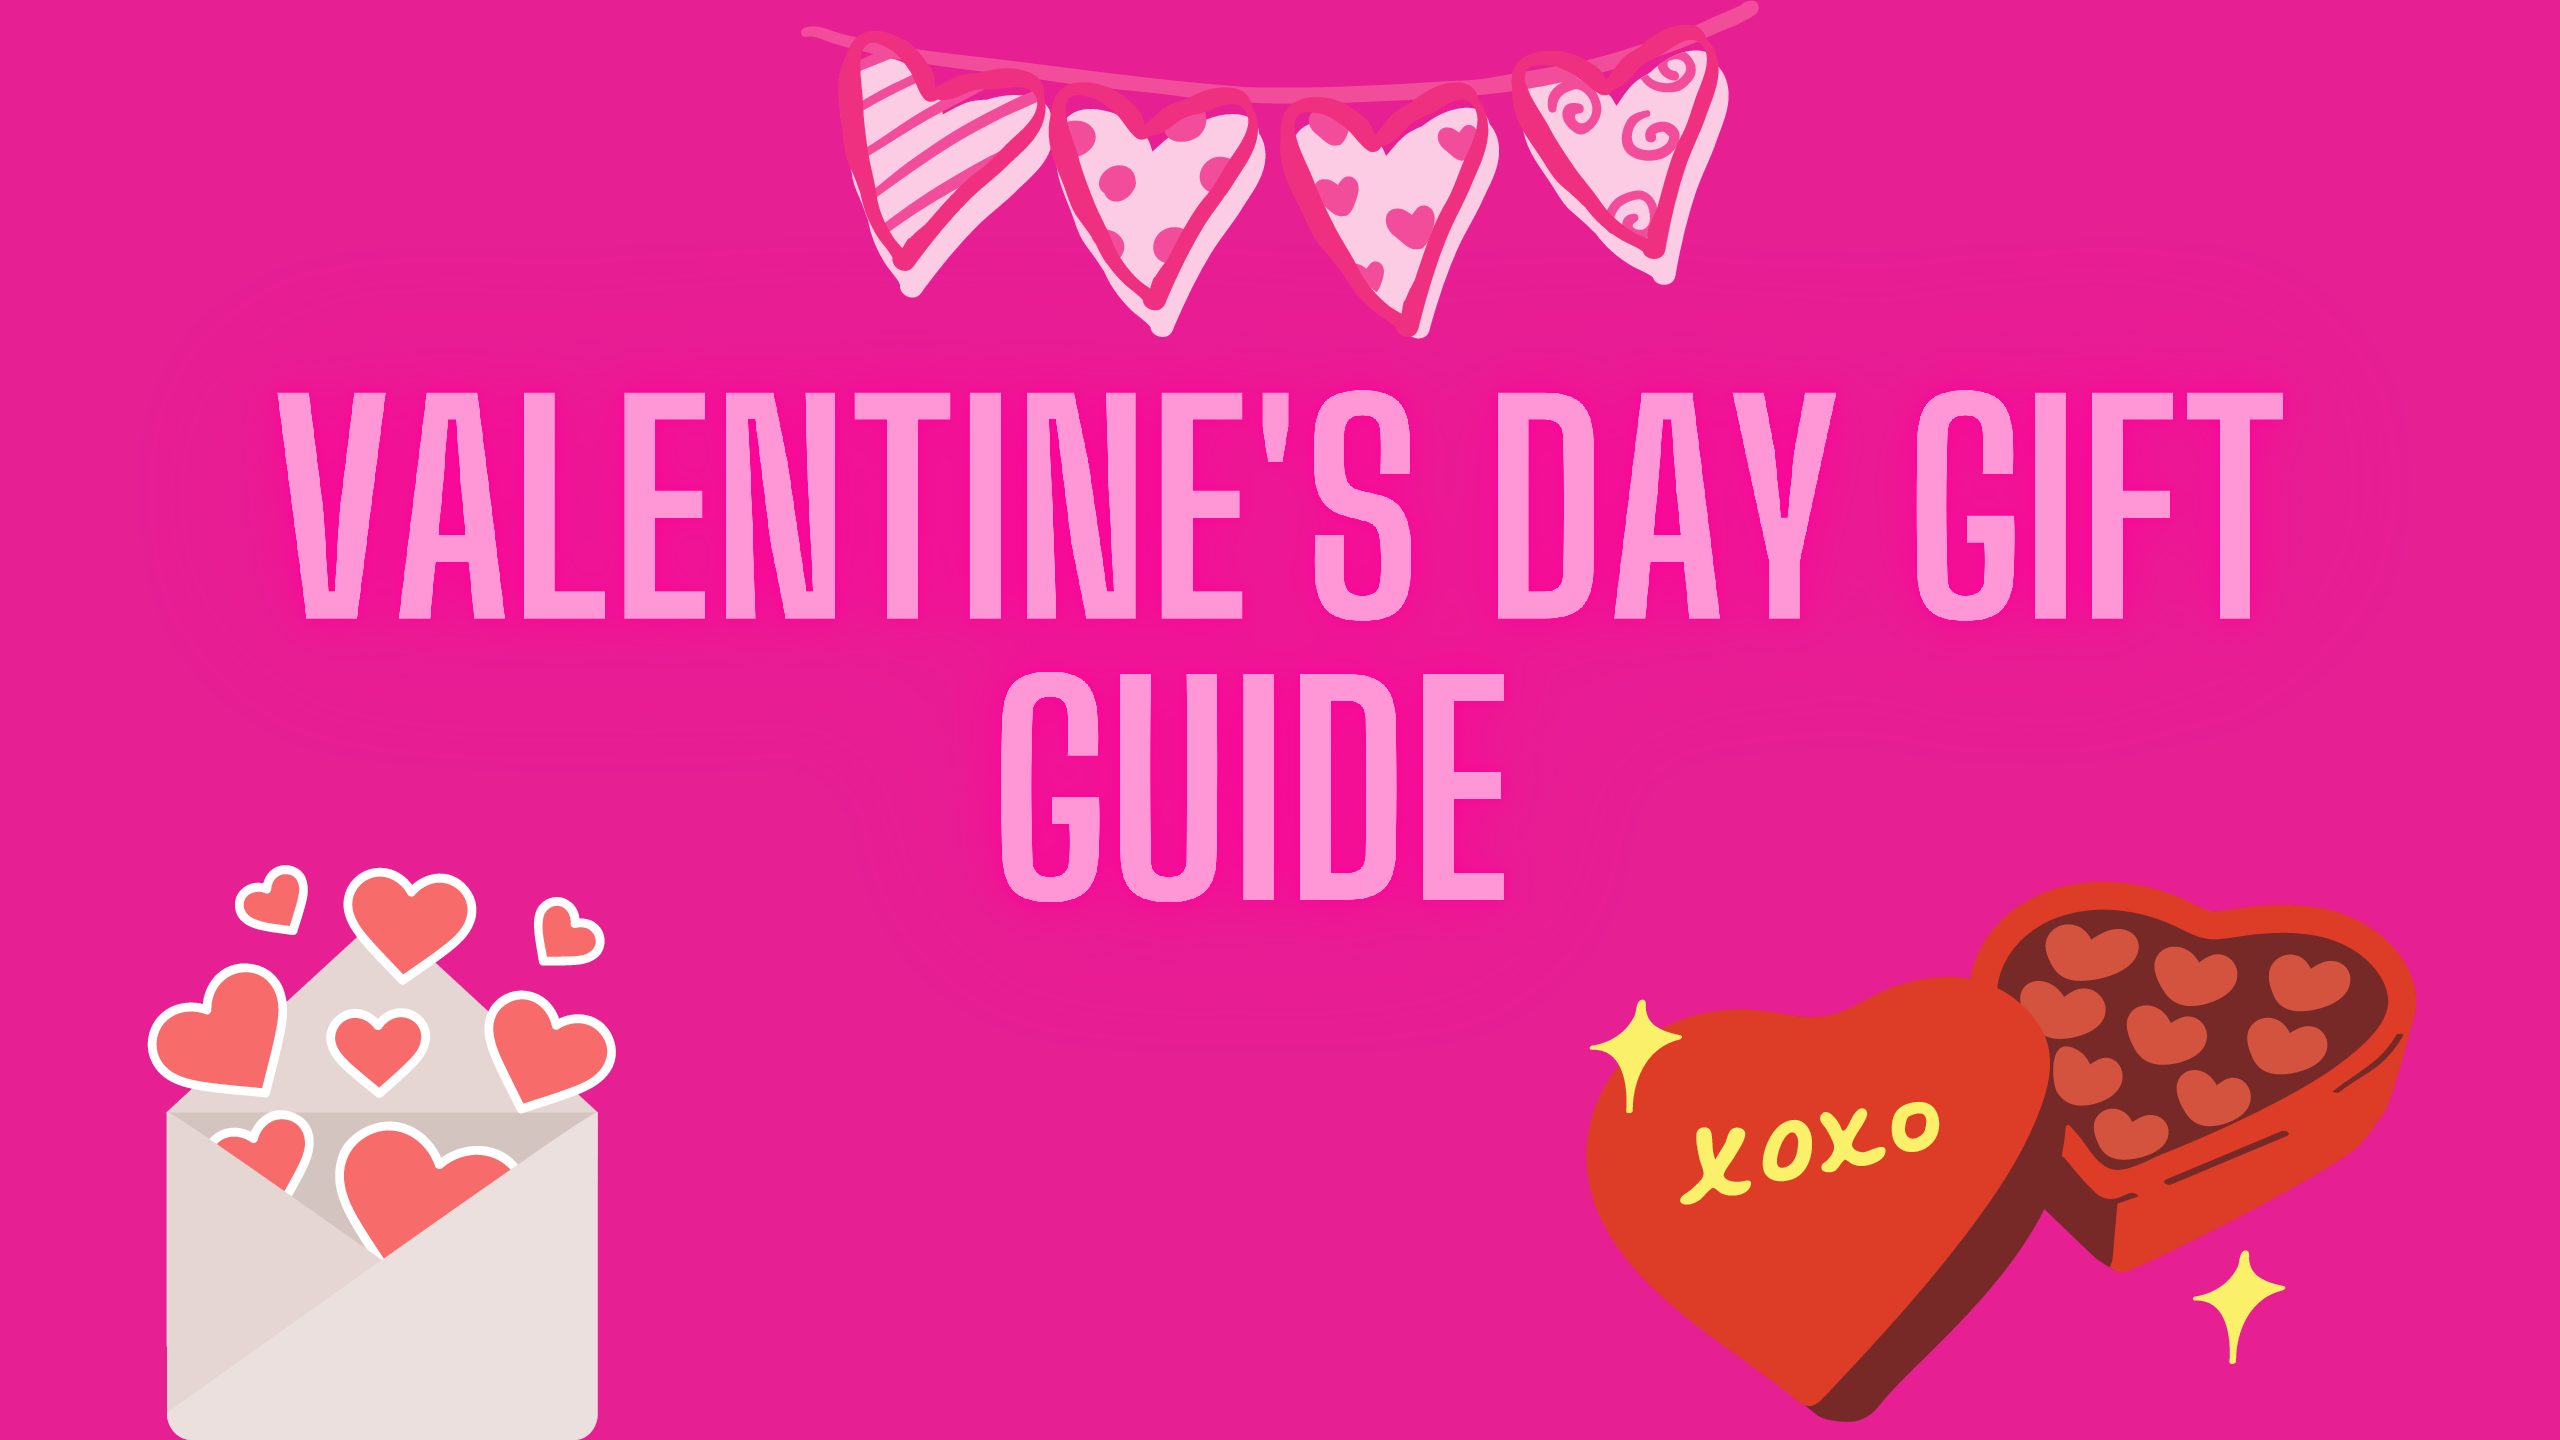 Your Valentines Day Gift Guide for 2022!